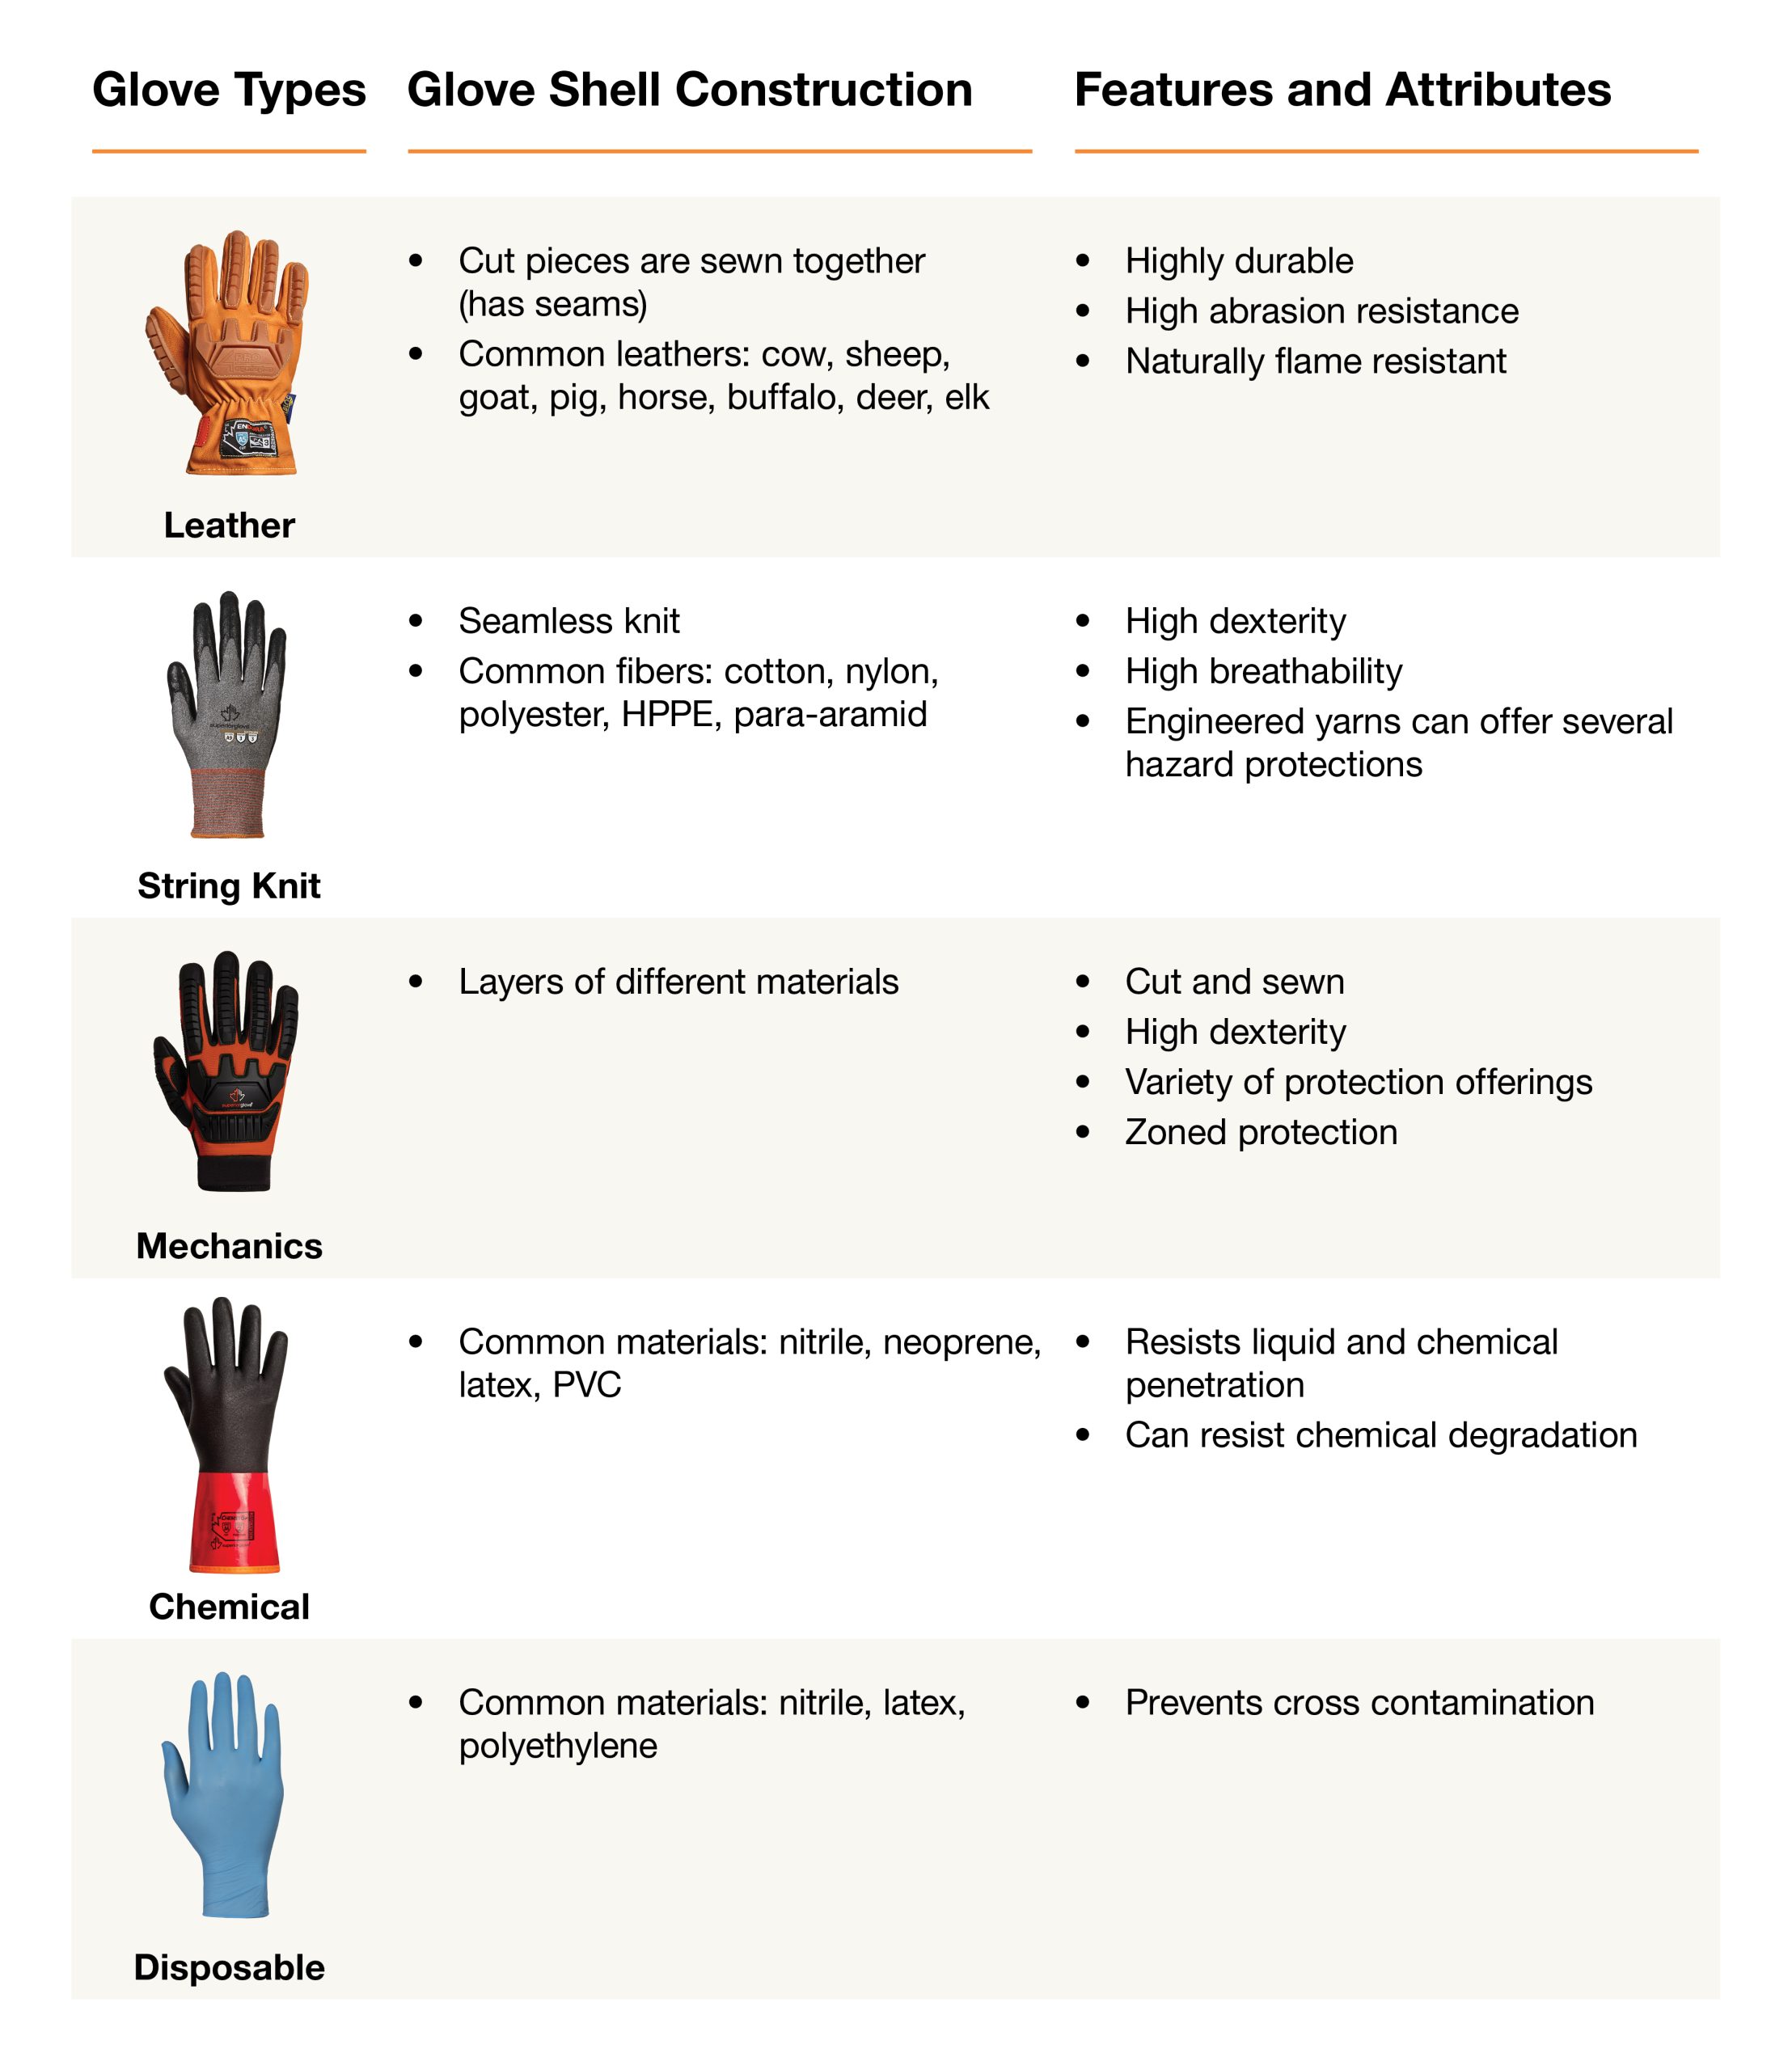 https://www.ohscanada.com/wp-content/uploads/2022/04/Article-1_Glove-101_Types-of-Gloves_Table-Image-scaled.jpg